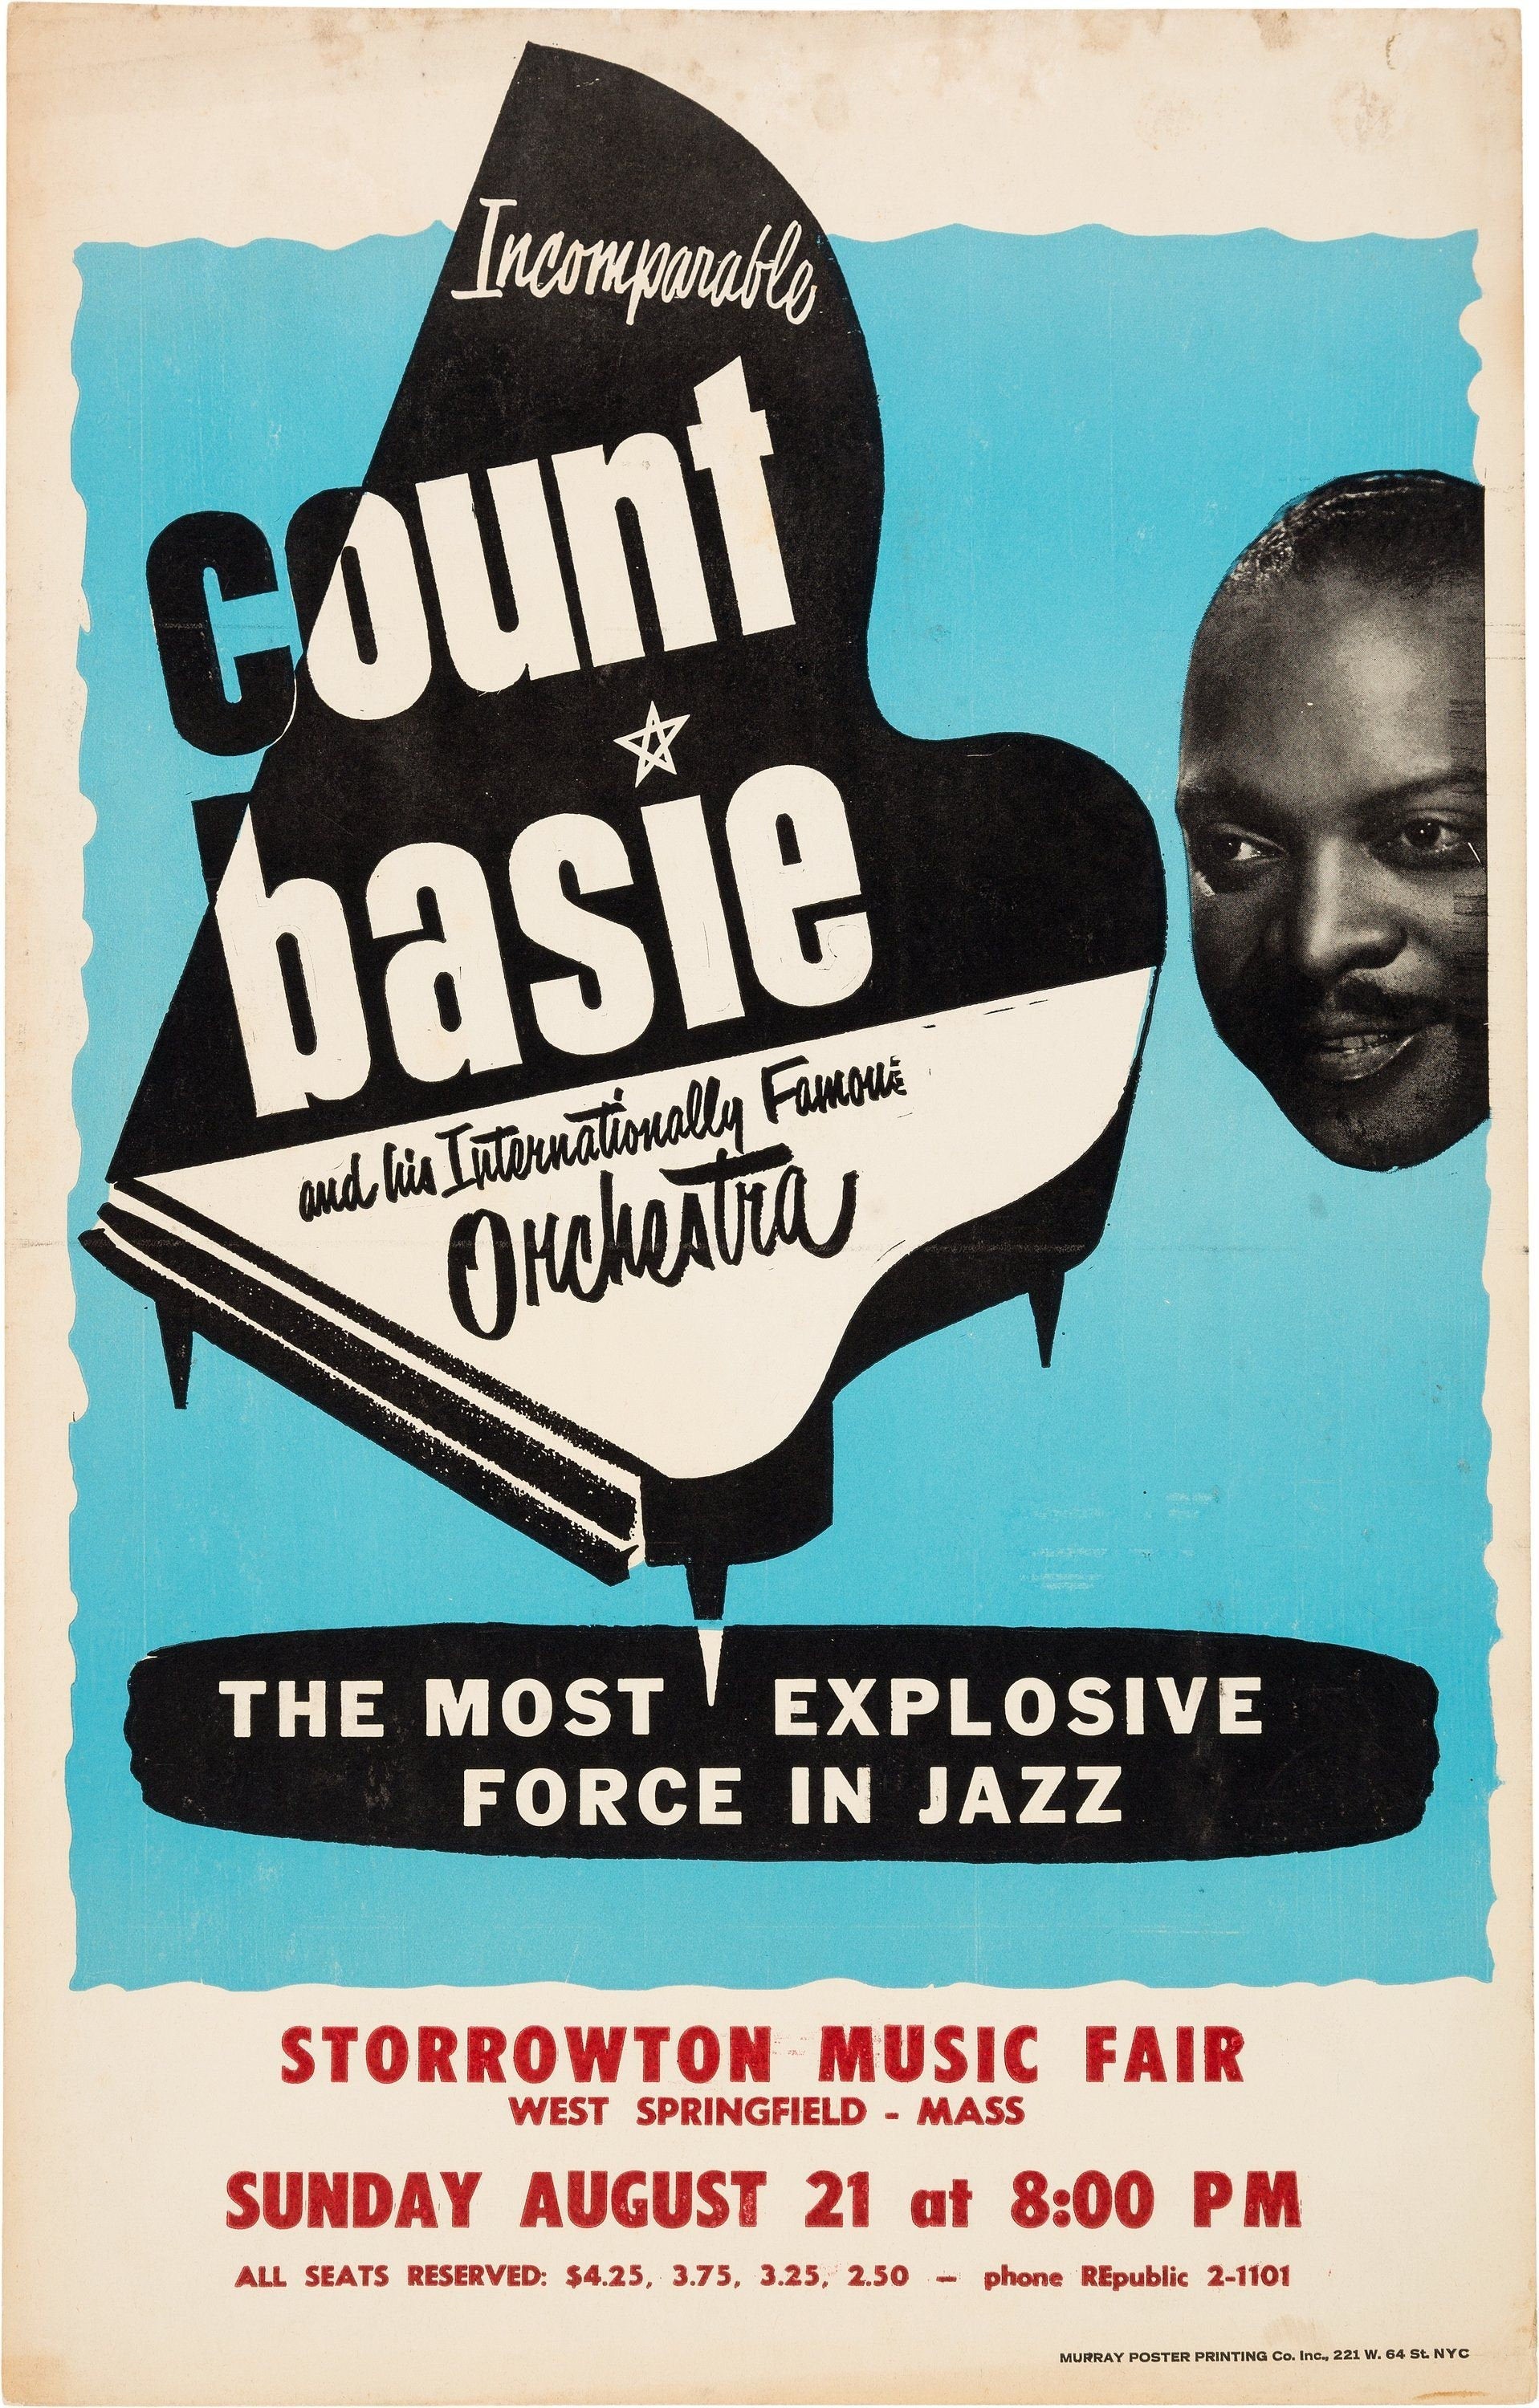 0796 Vintage Music Art Poster - Count Basie And His Orchestra